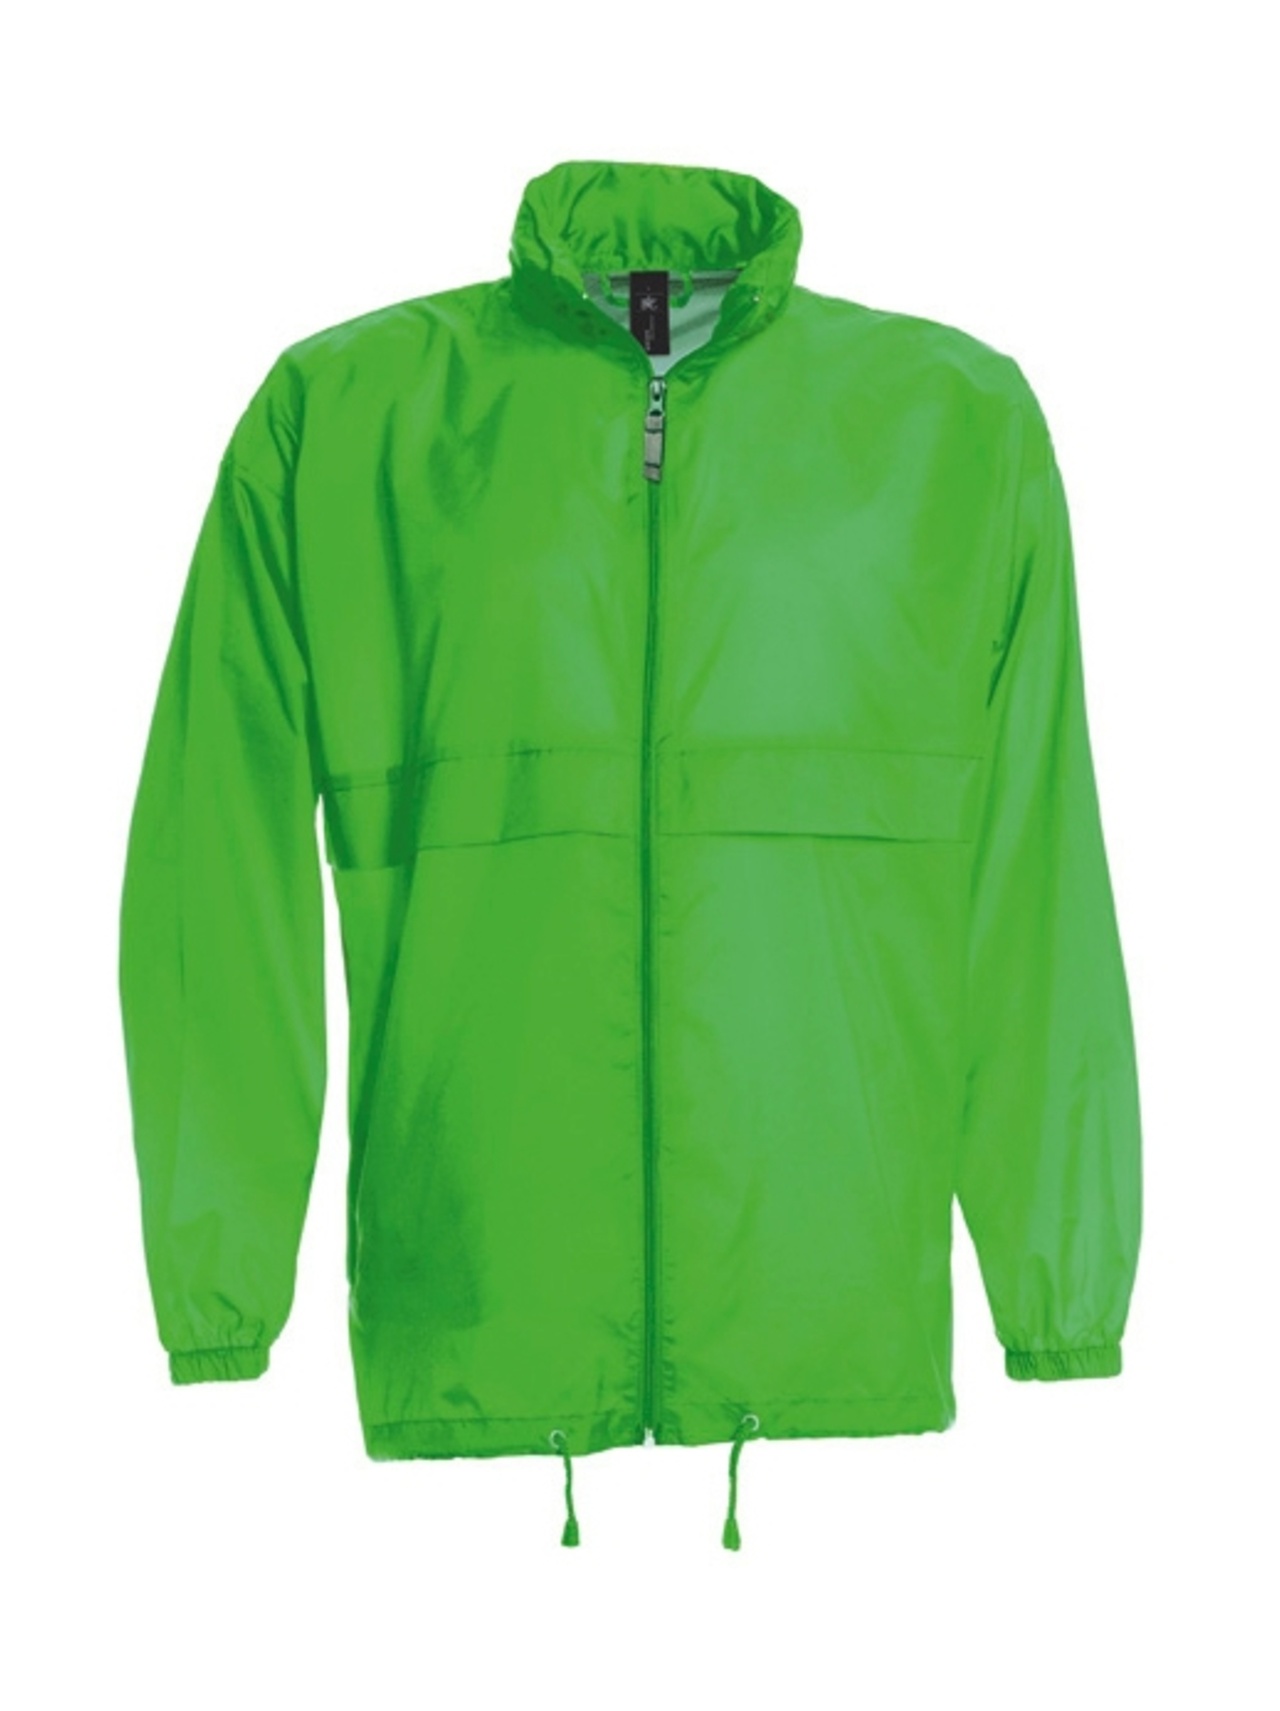 B and C Collection Sirocco - REAL GREEN - XL